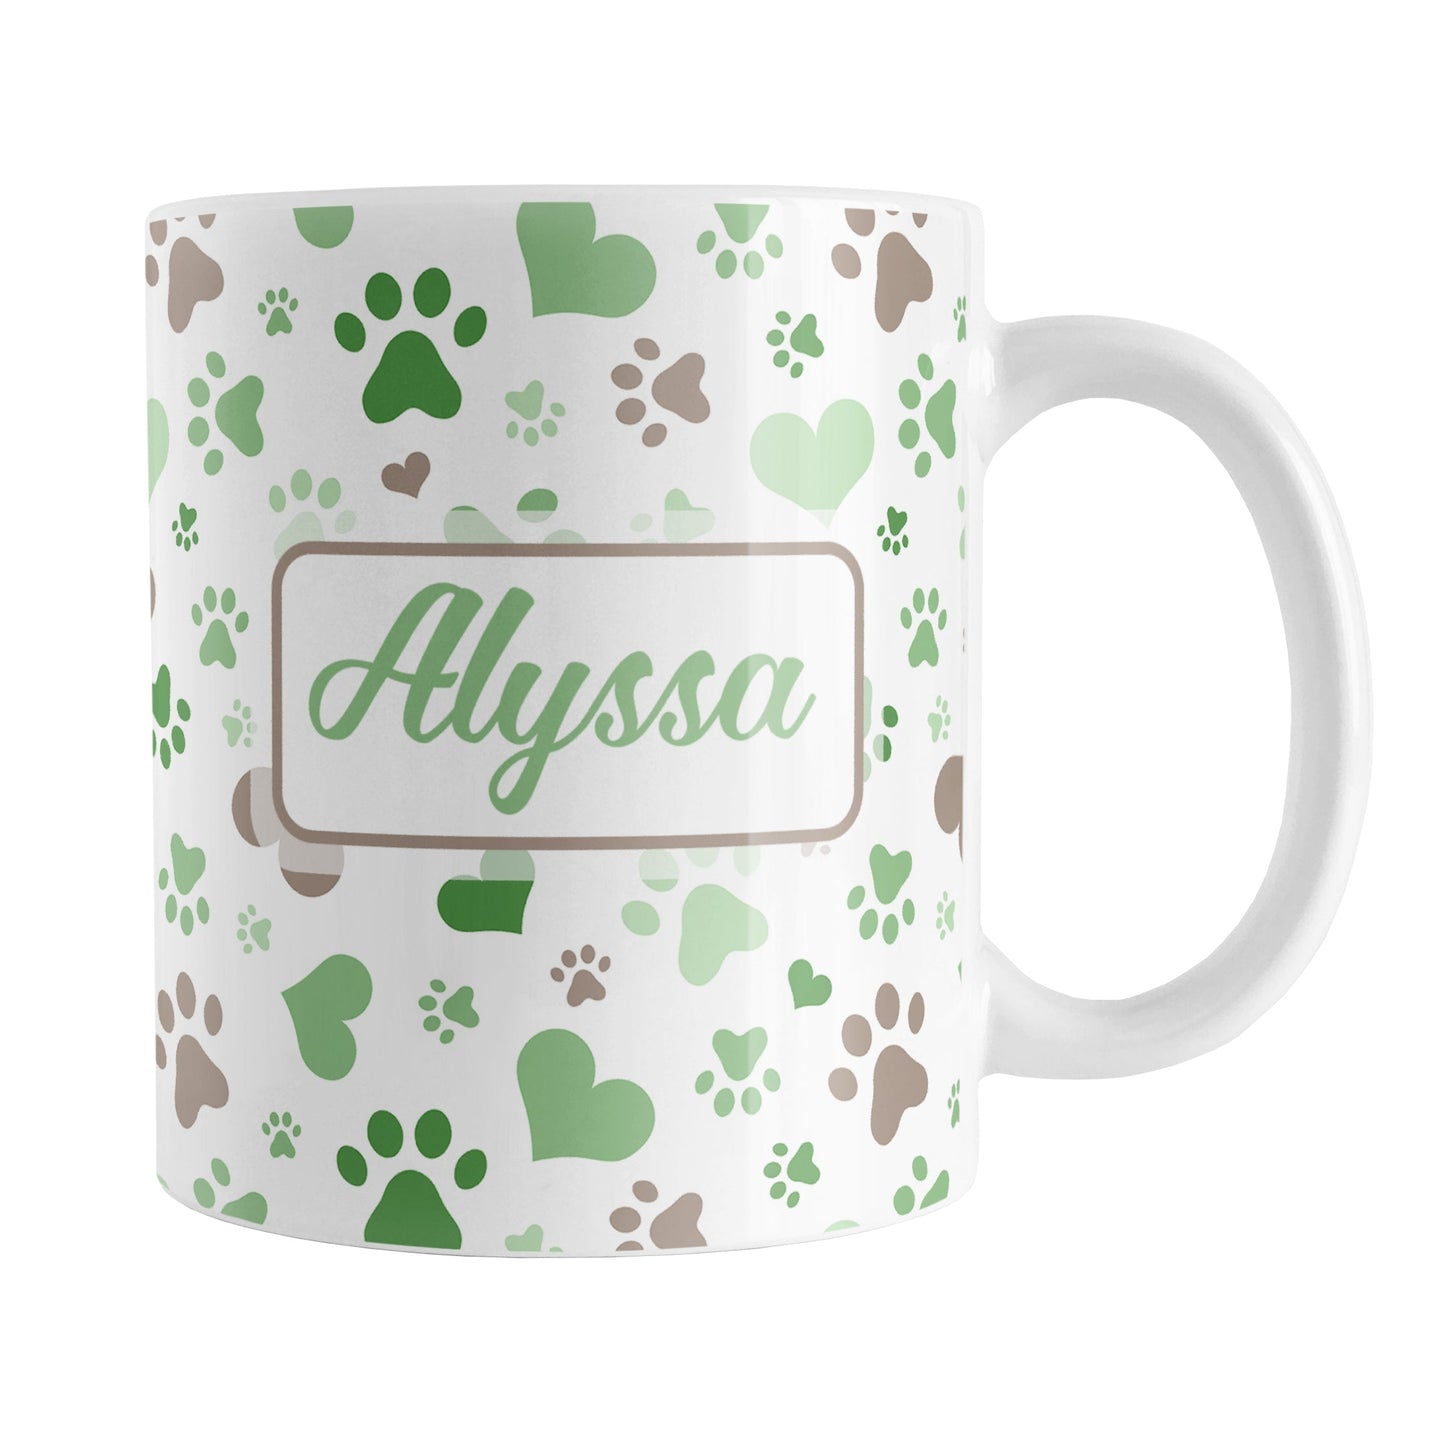 Personalized Green Hearts and Paw Prints Mug (11oz) at Amy's Coffee Mugs. A ceramic coffee mug designed with a pattern of hearts and paw prints in green and brown that wraps around the mug to the handle. Your name is personalized in green on both sides of the mug.